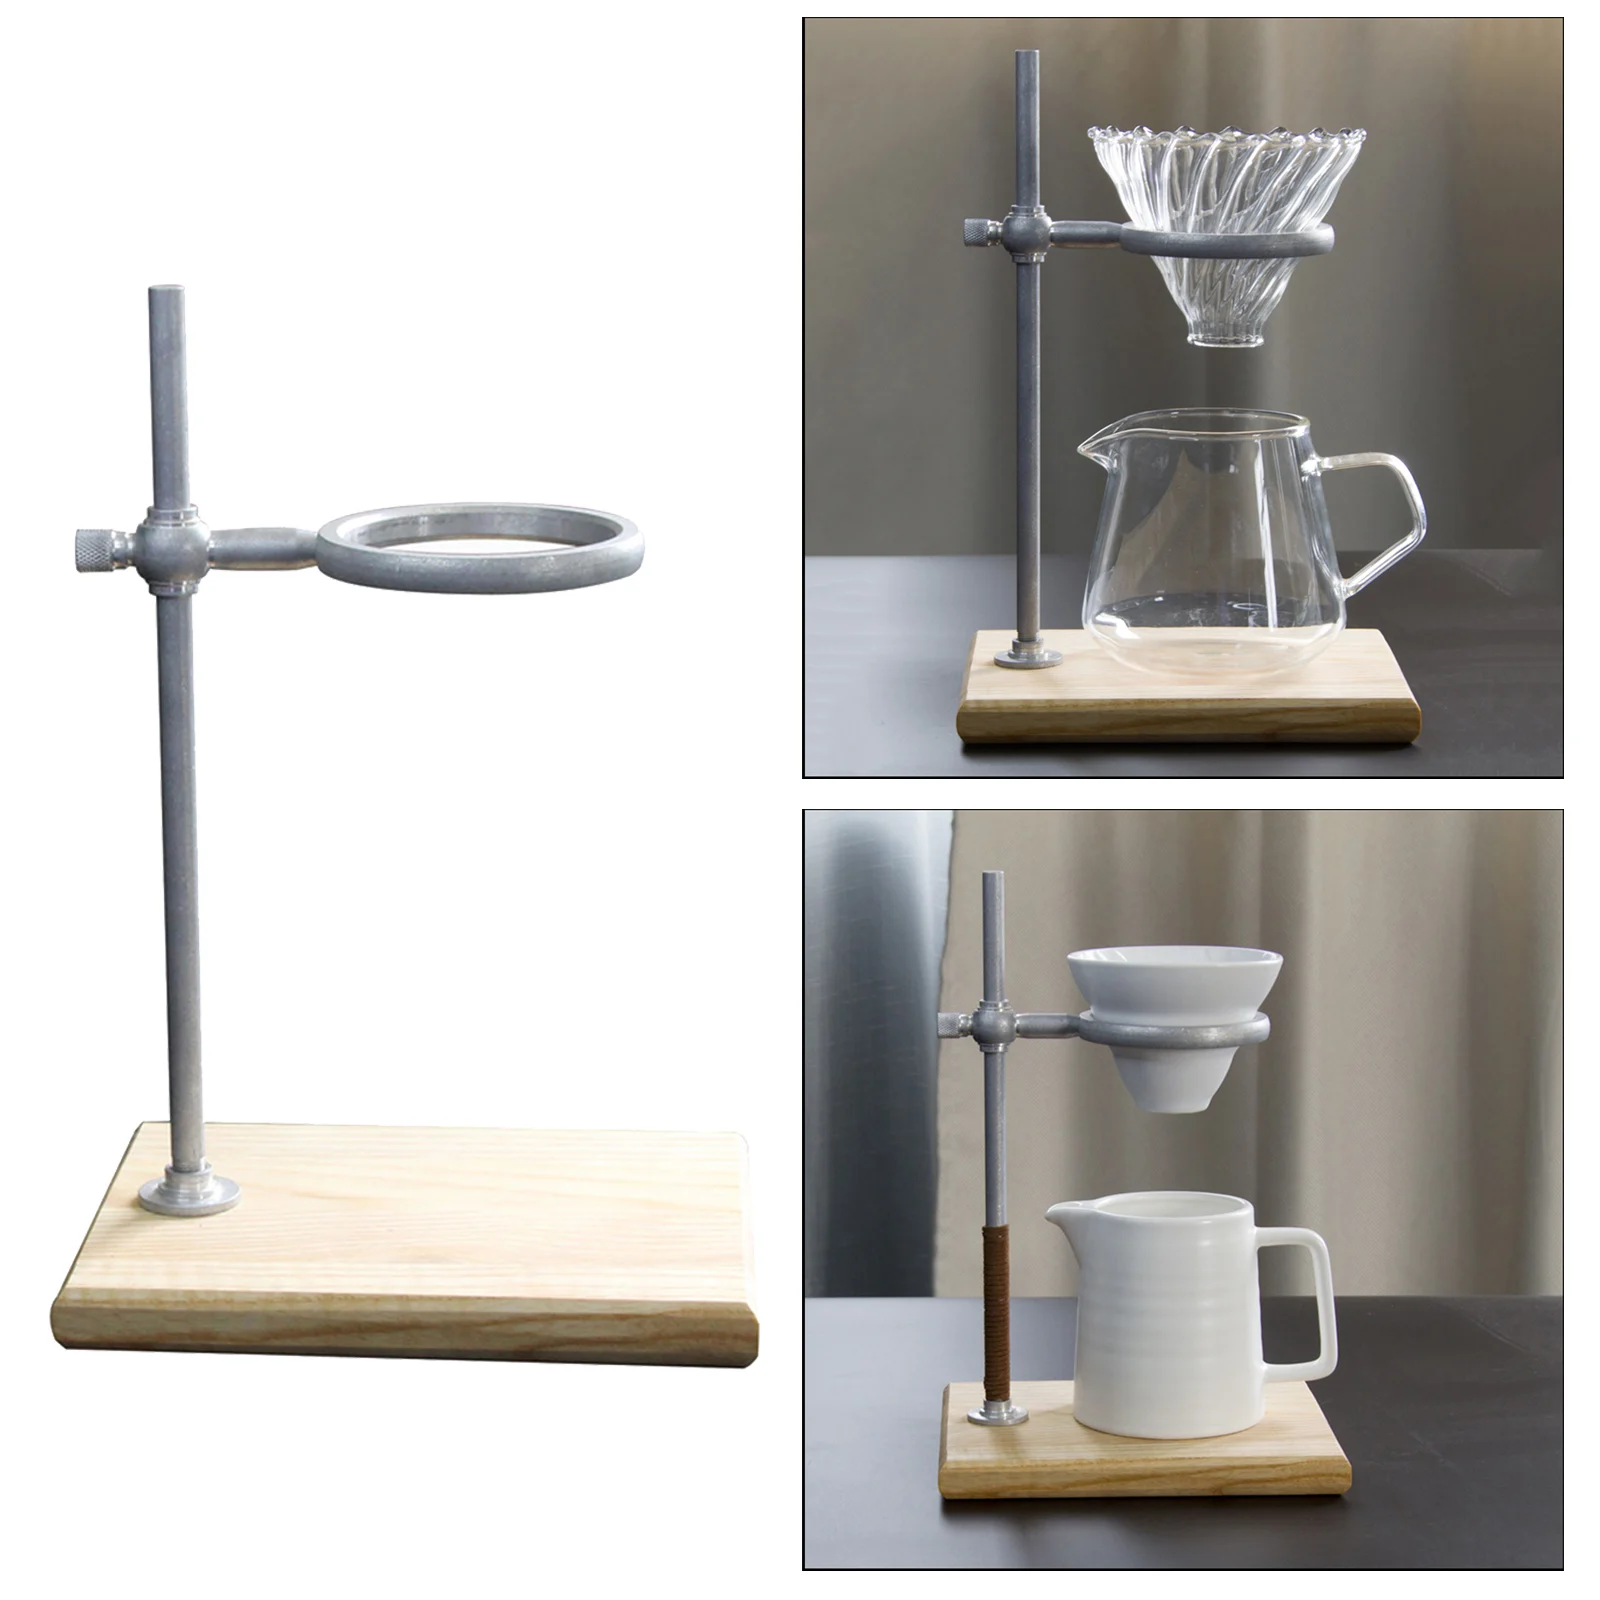 Pour Over Coffee Dripper Stand Coffee Filter Holder Rack Coffee Mug/Pot Holder Woden Station